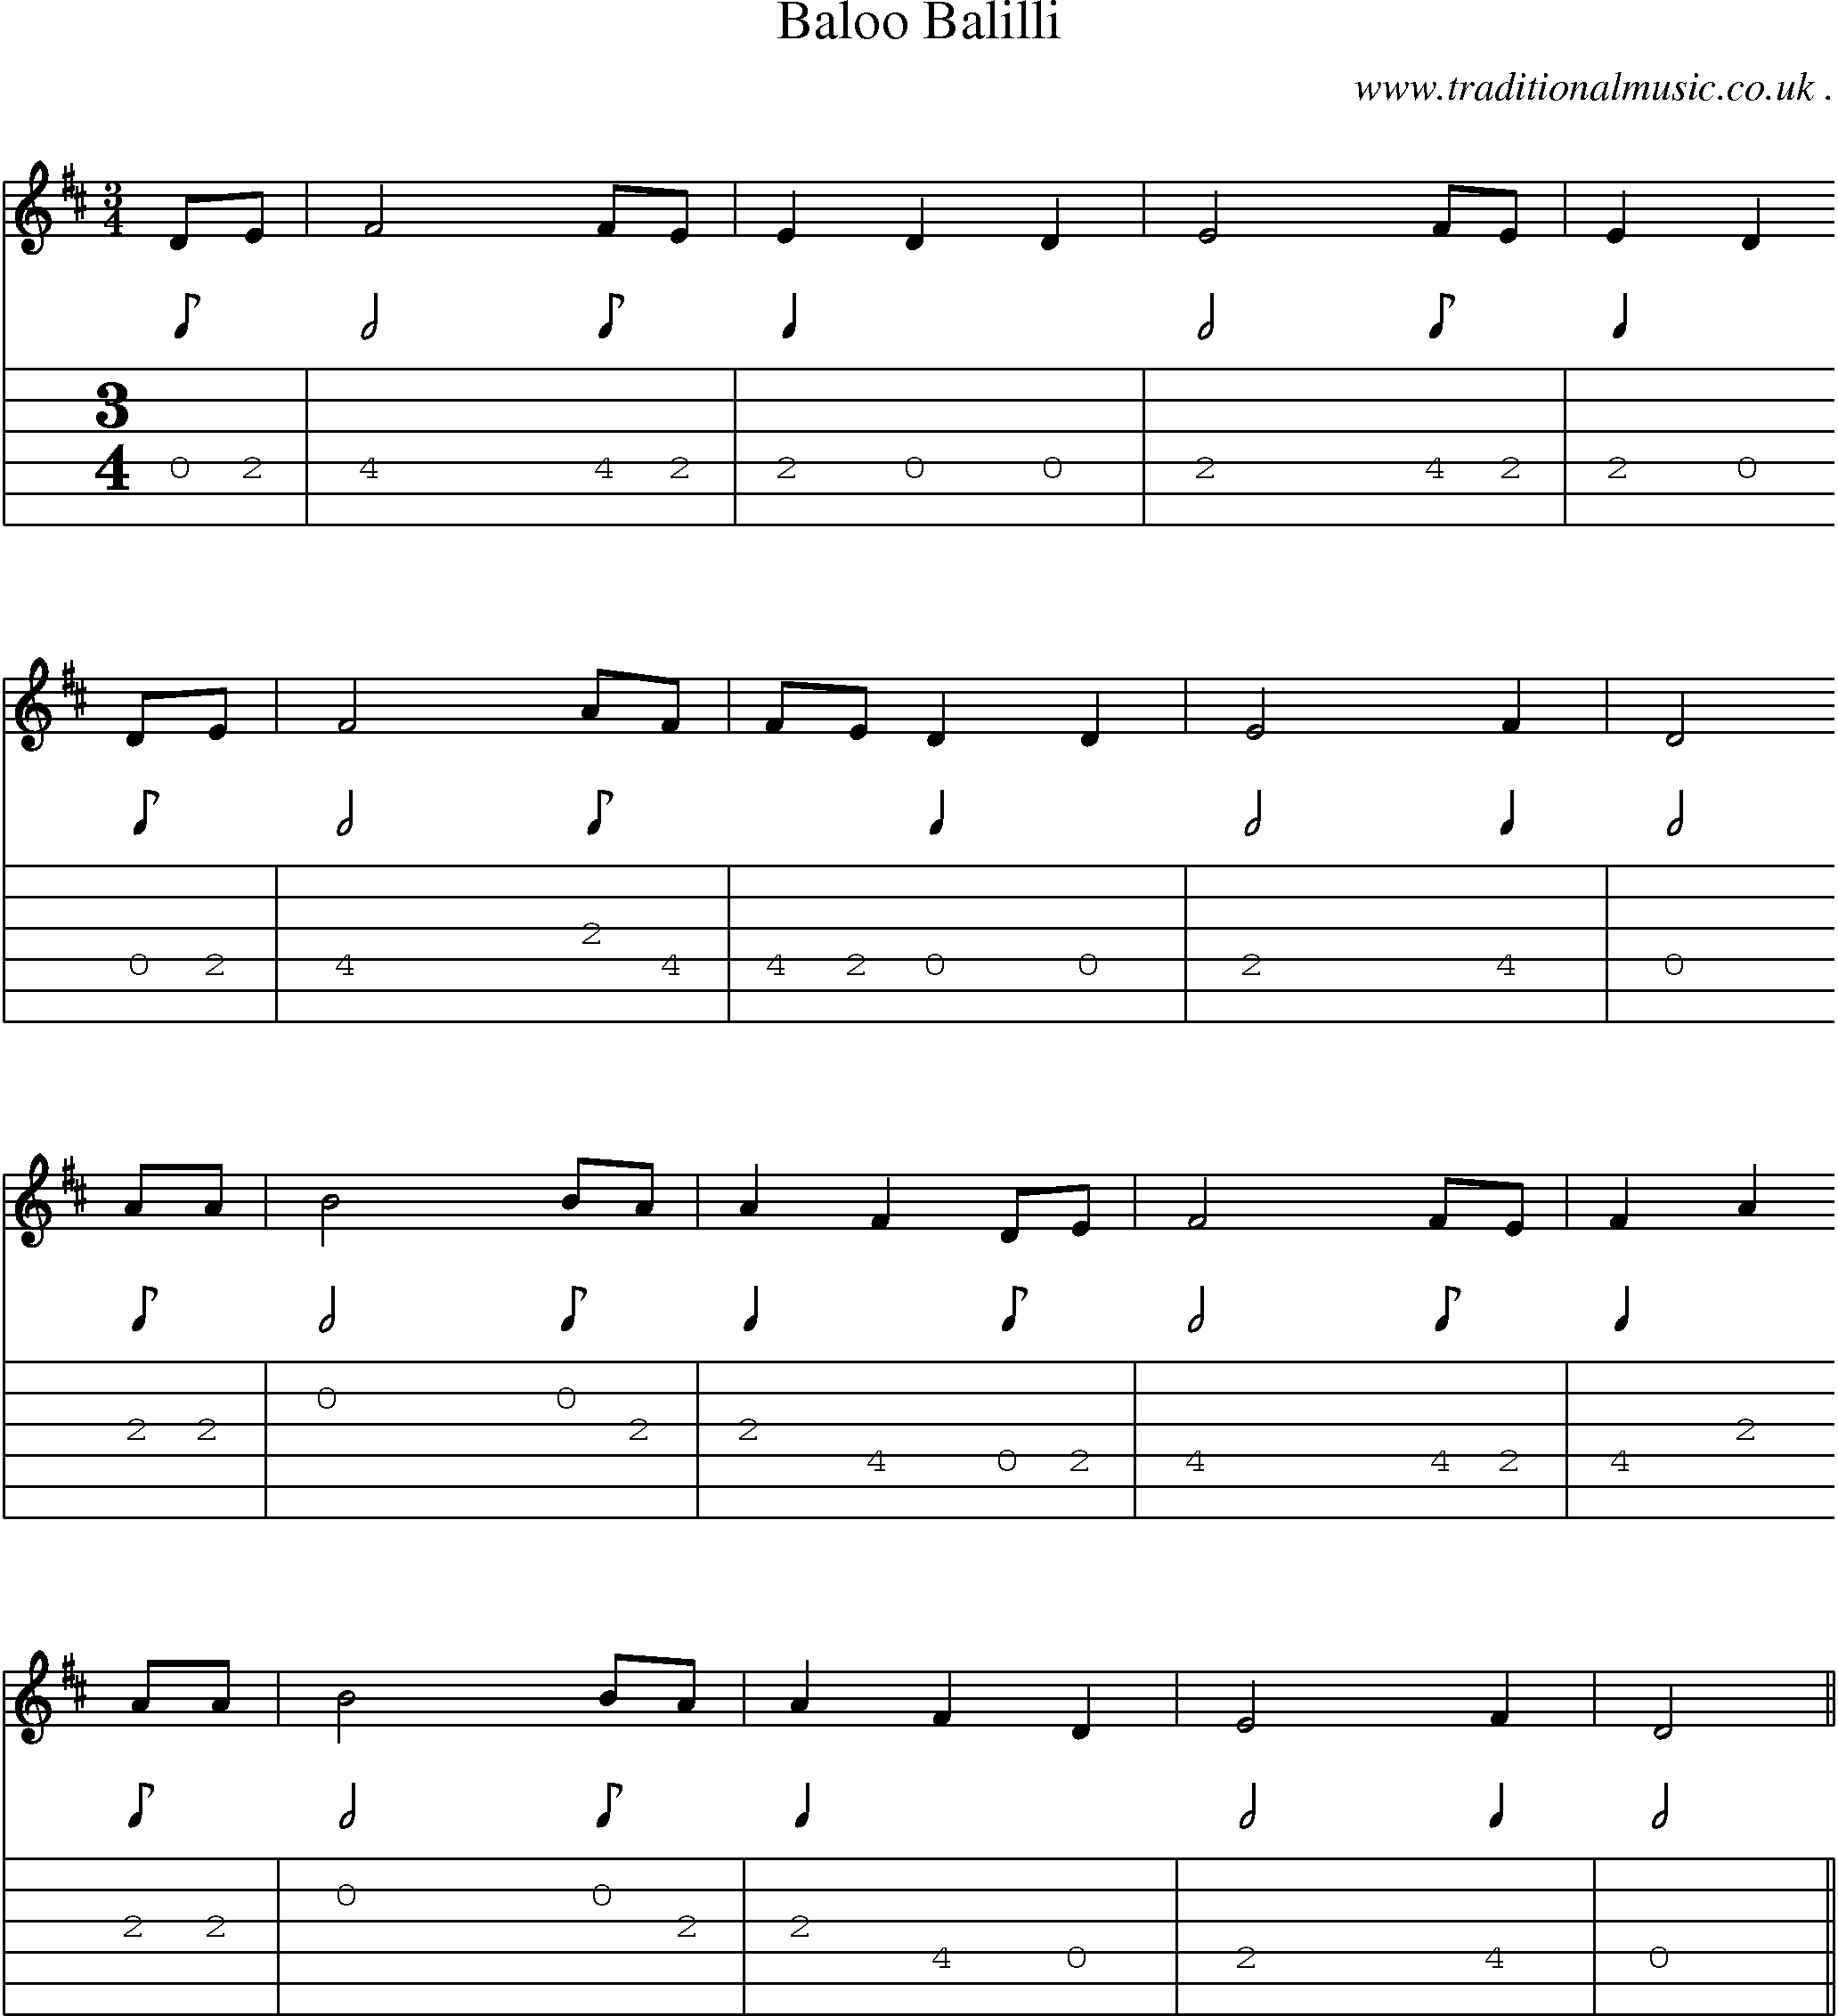 Sheet-music  score, Chords and Guitar Tabs for Baloo Balilli